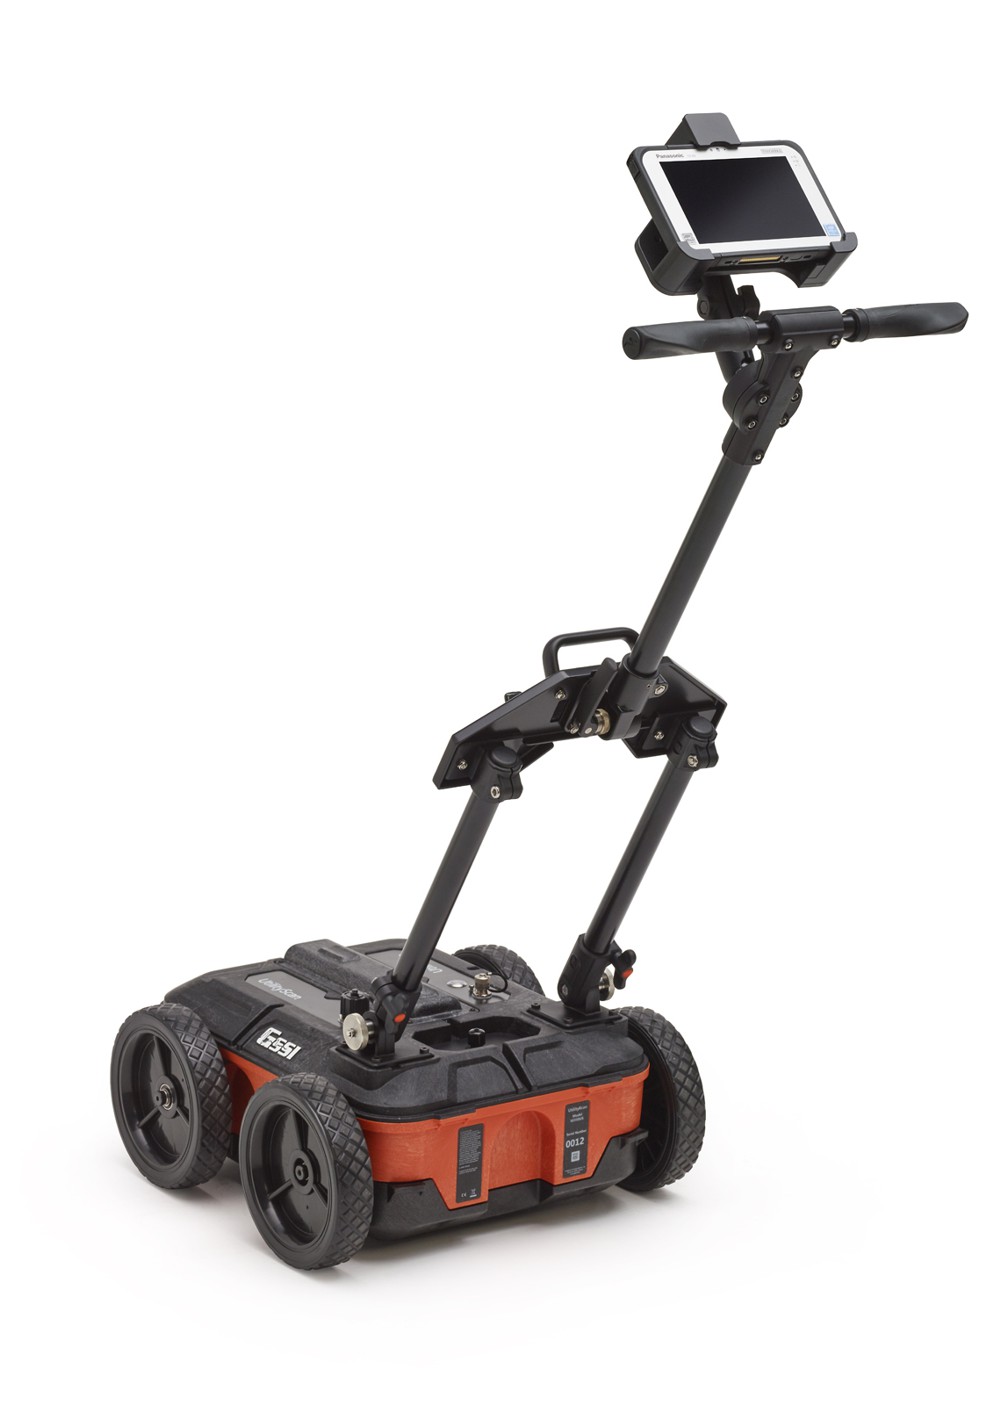 GSSI Showcases It’s Latest GPR Technology at World of Concrete 2018